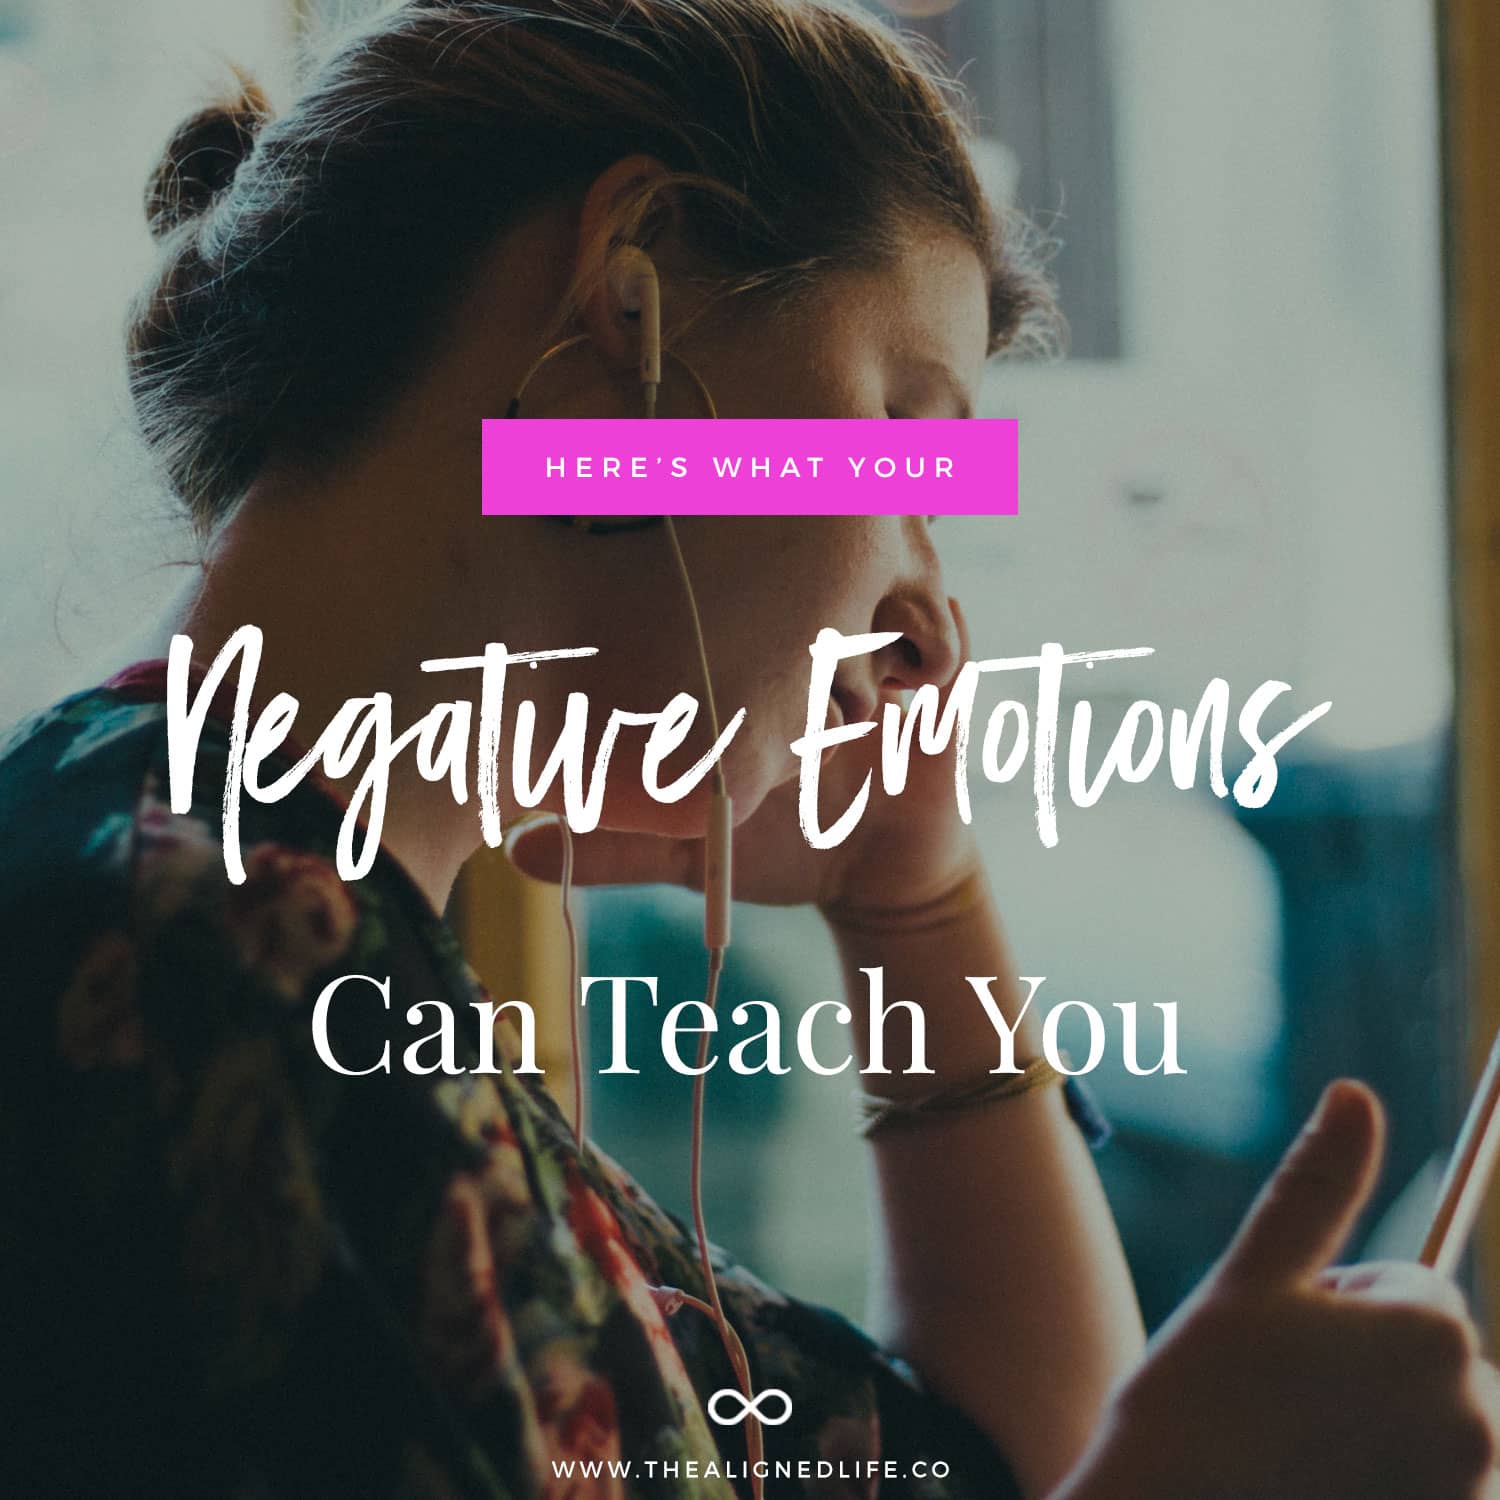 Finding The Silver Lining: What Your Negative Emotions Can Teach You